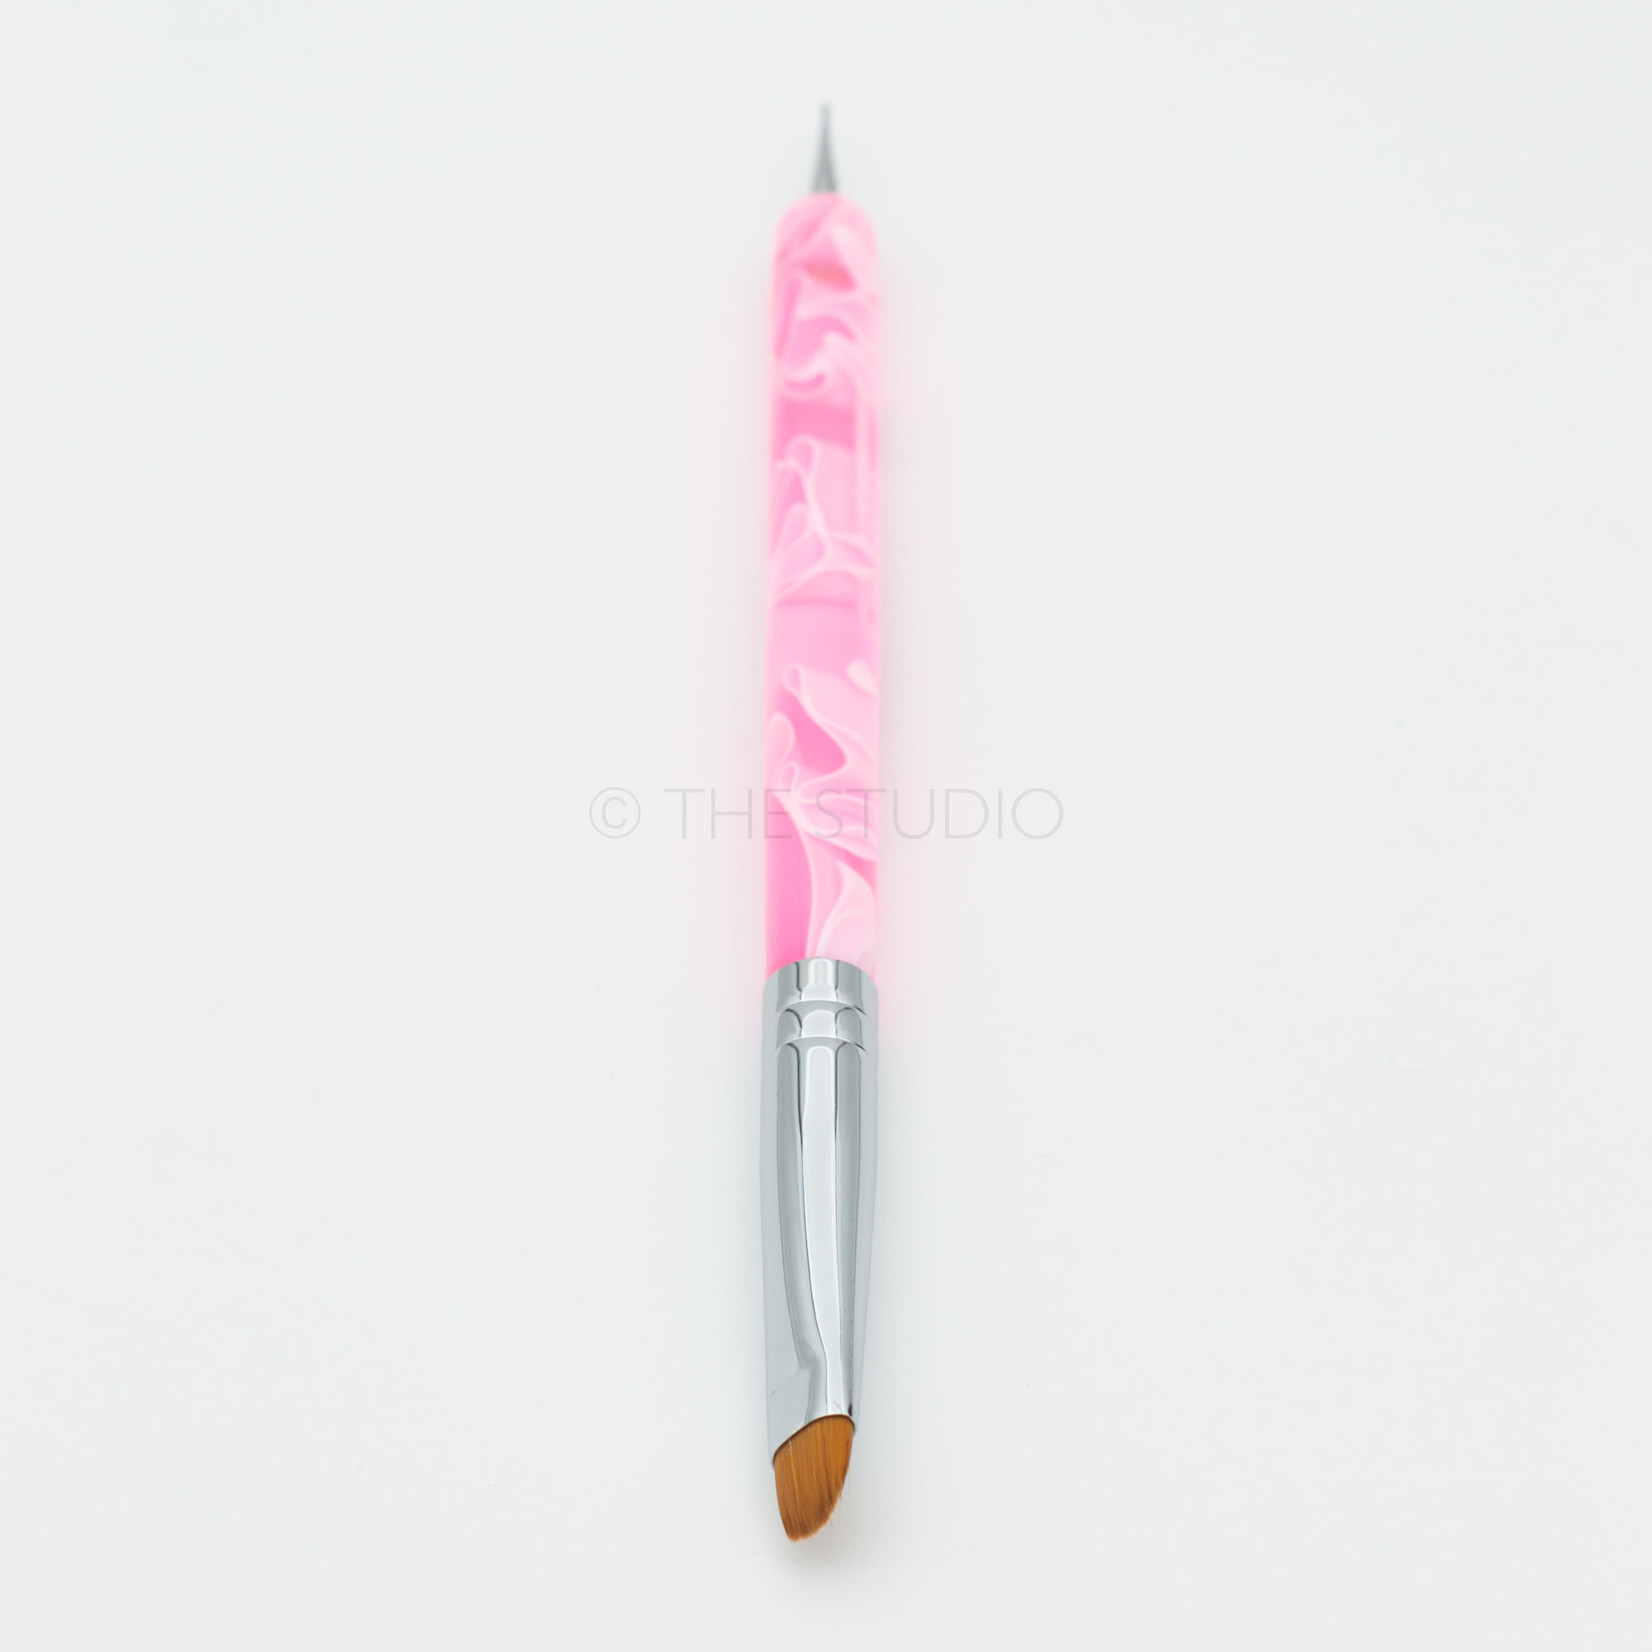 Cre8tion Cre8tion - French Brush w/ Dotting Tool - #10 Pink - 12125